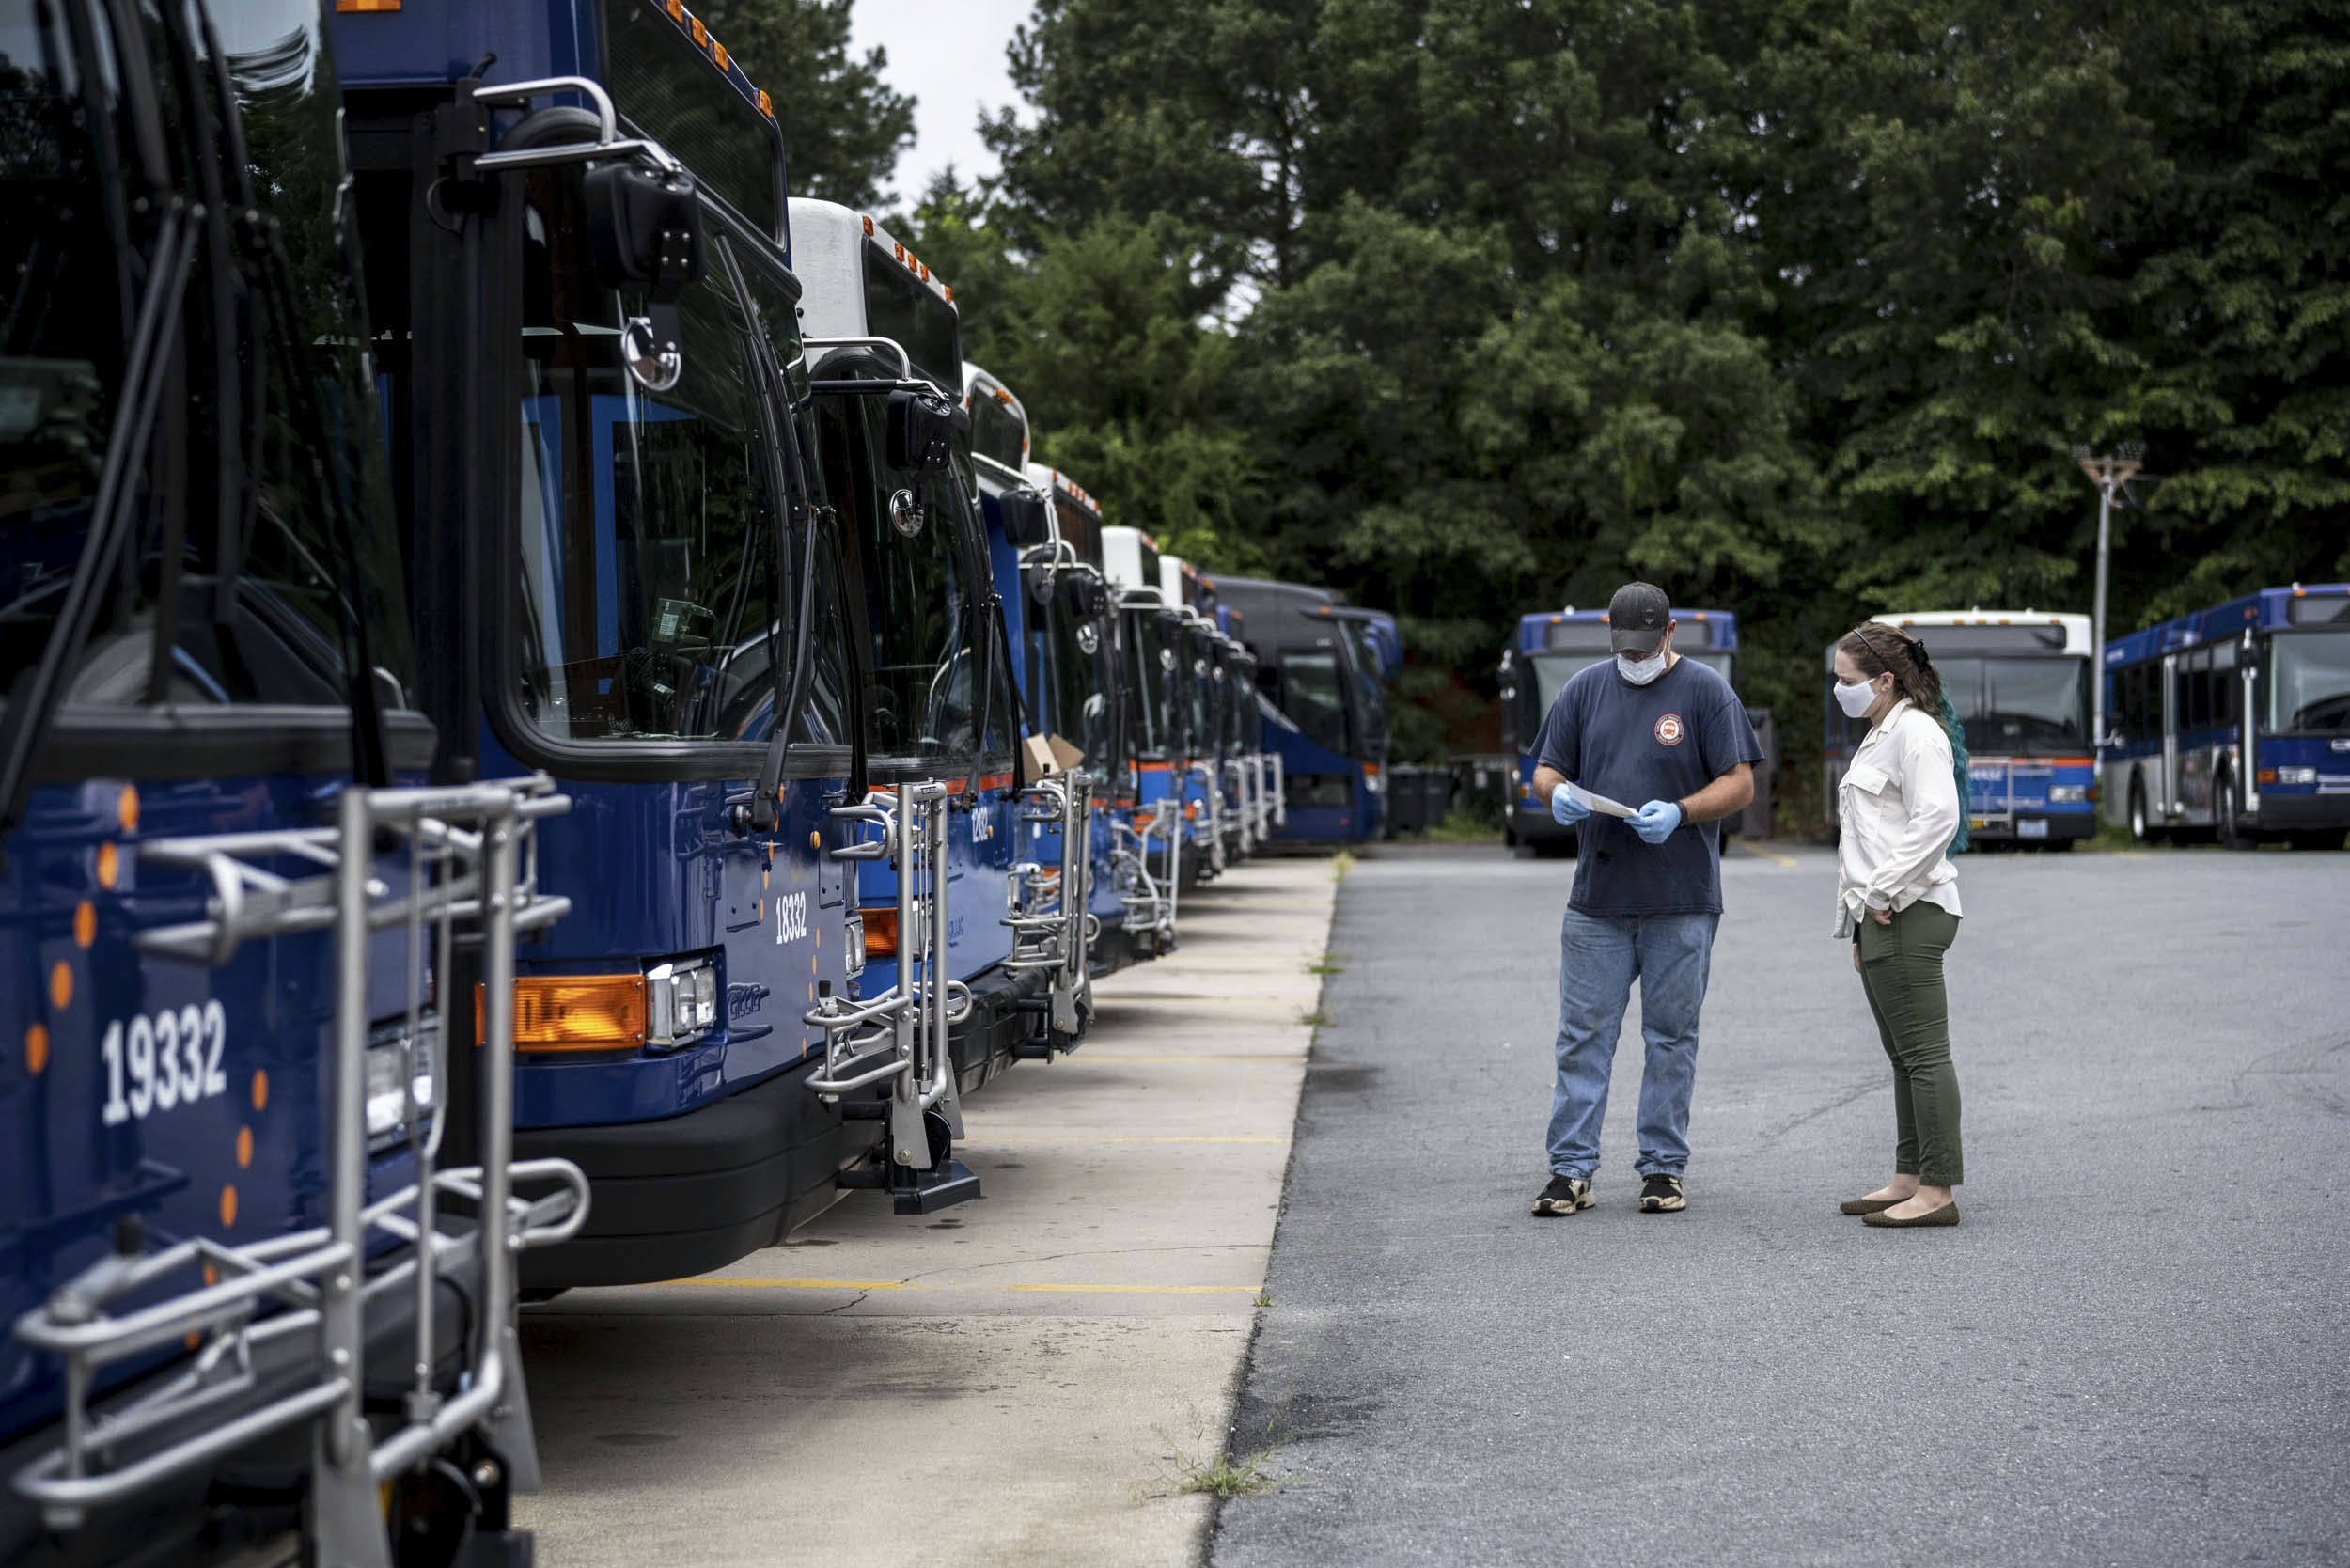 Scott Anderson, left, talking to Allison Day, right in front of UVA transportation buses